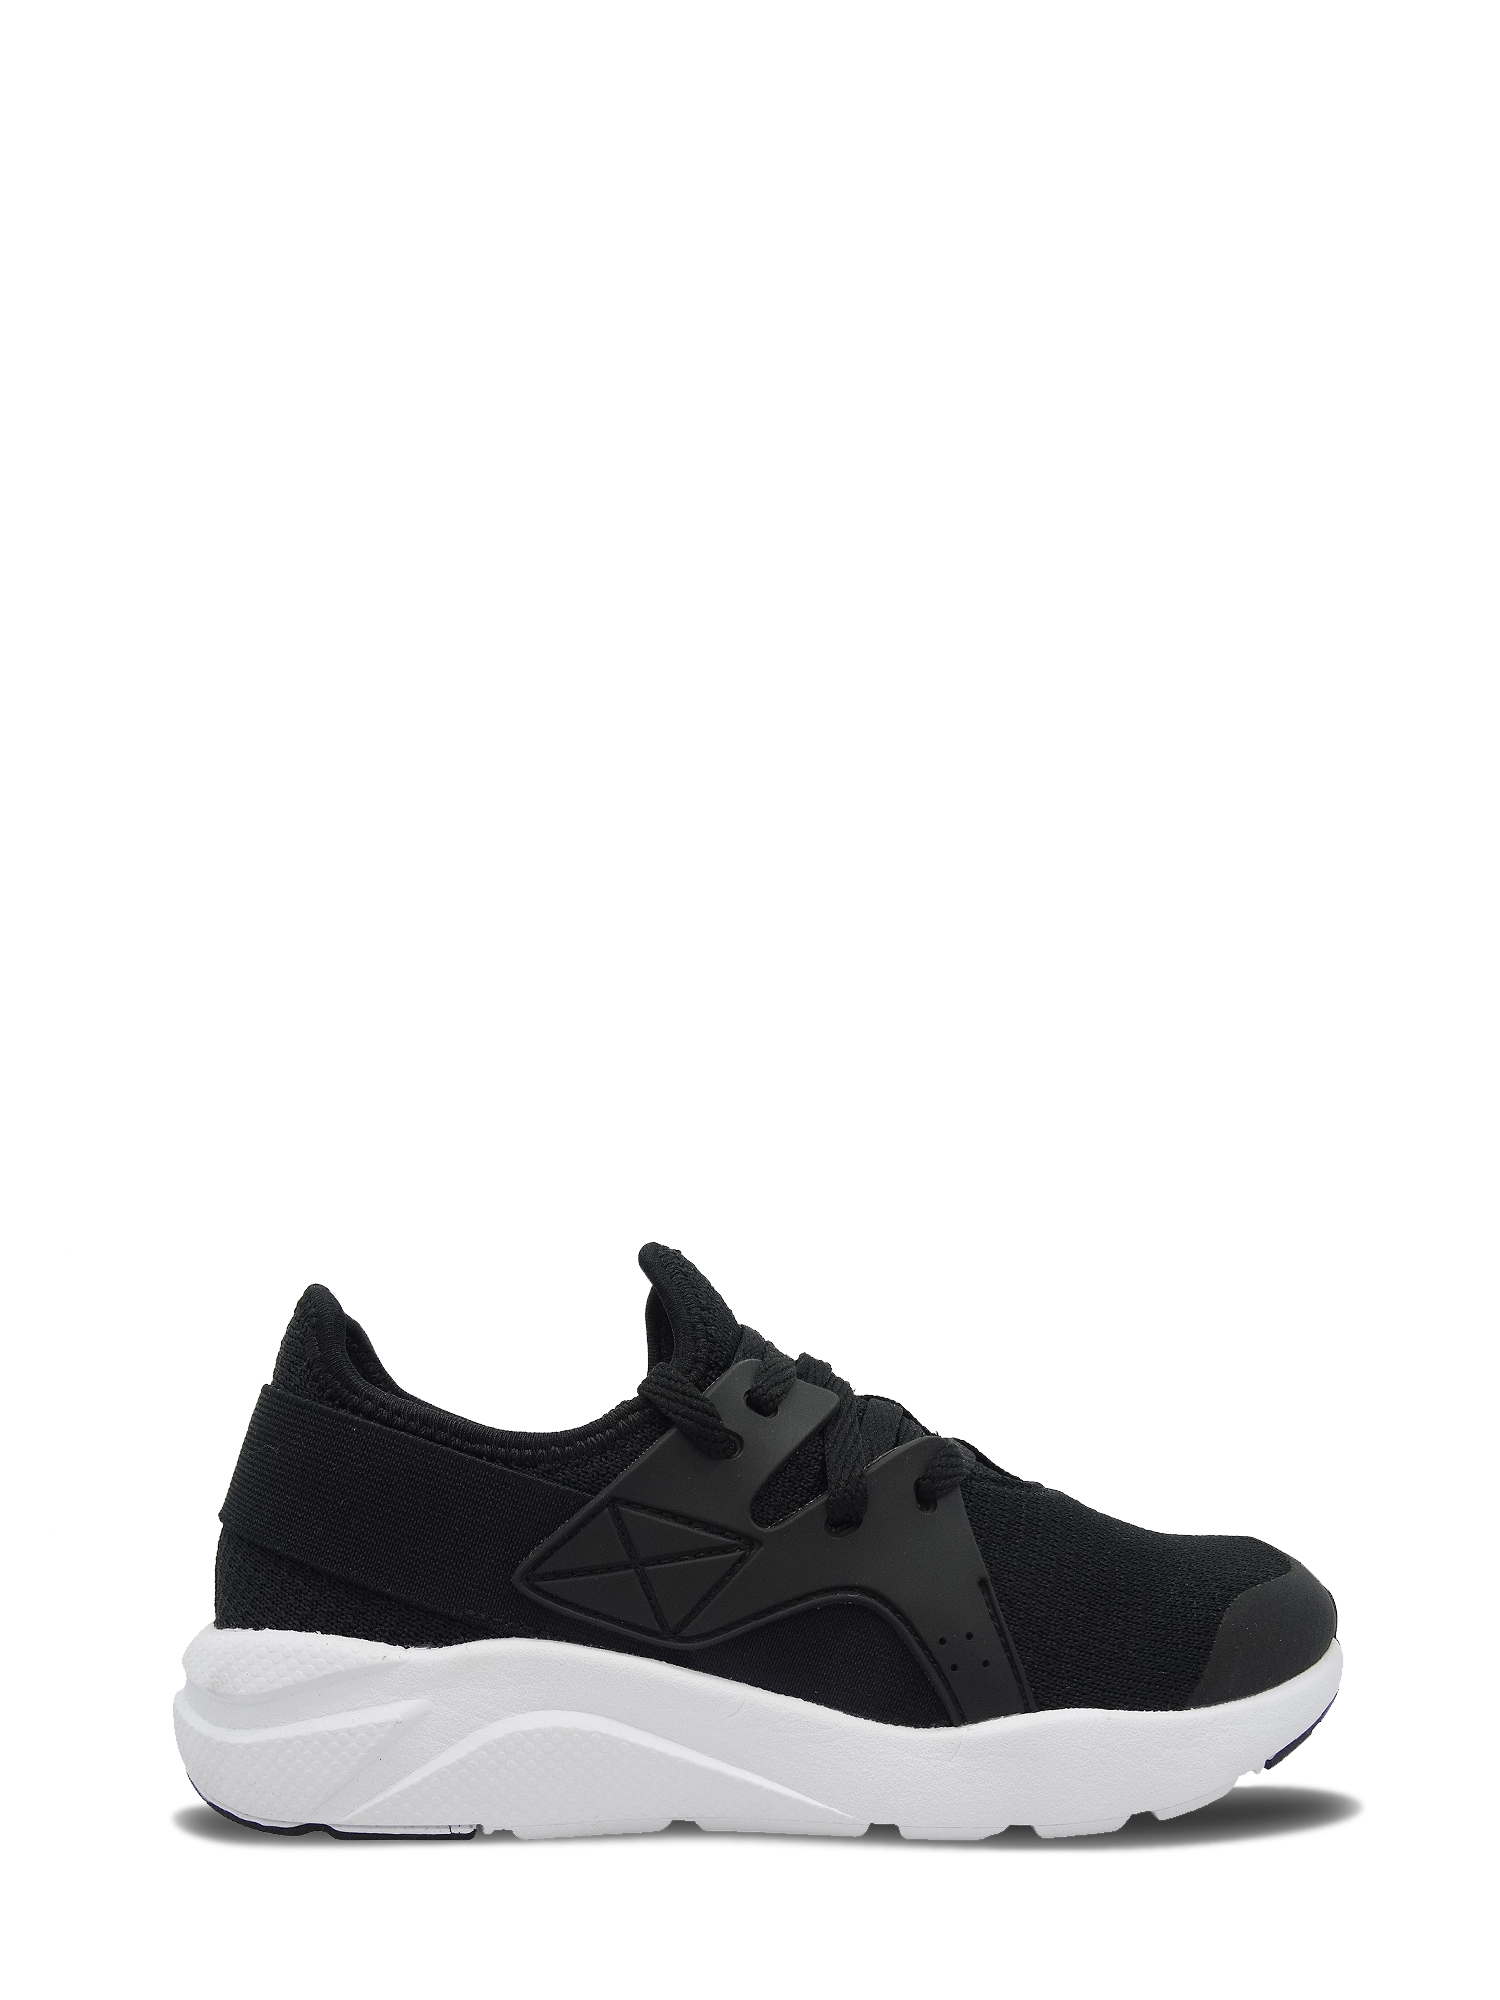 Women's Caged Mesh Athletic Shoe - image 5 of 5